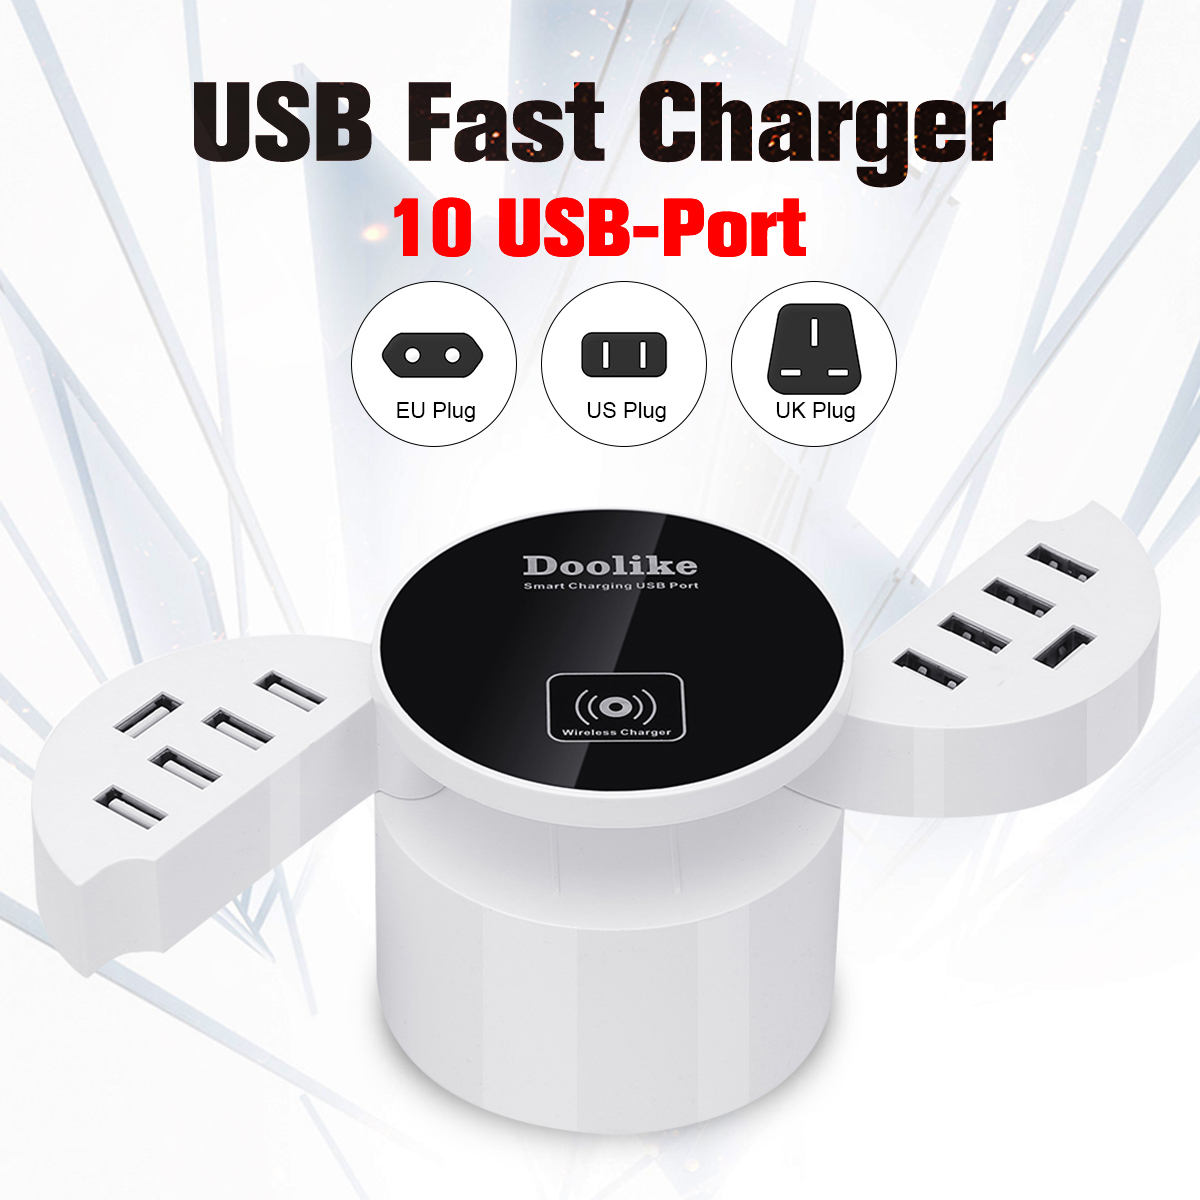 Bakeey-DL-CDA-16W-10Ports-USB-Charger-With-Wireless-Charger-For-iPhone-X-88Plus-Samsung-S8-m-1289443-1